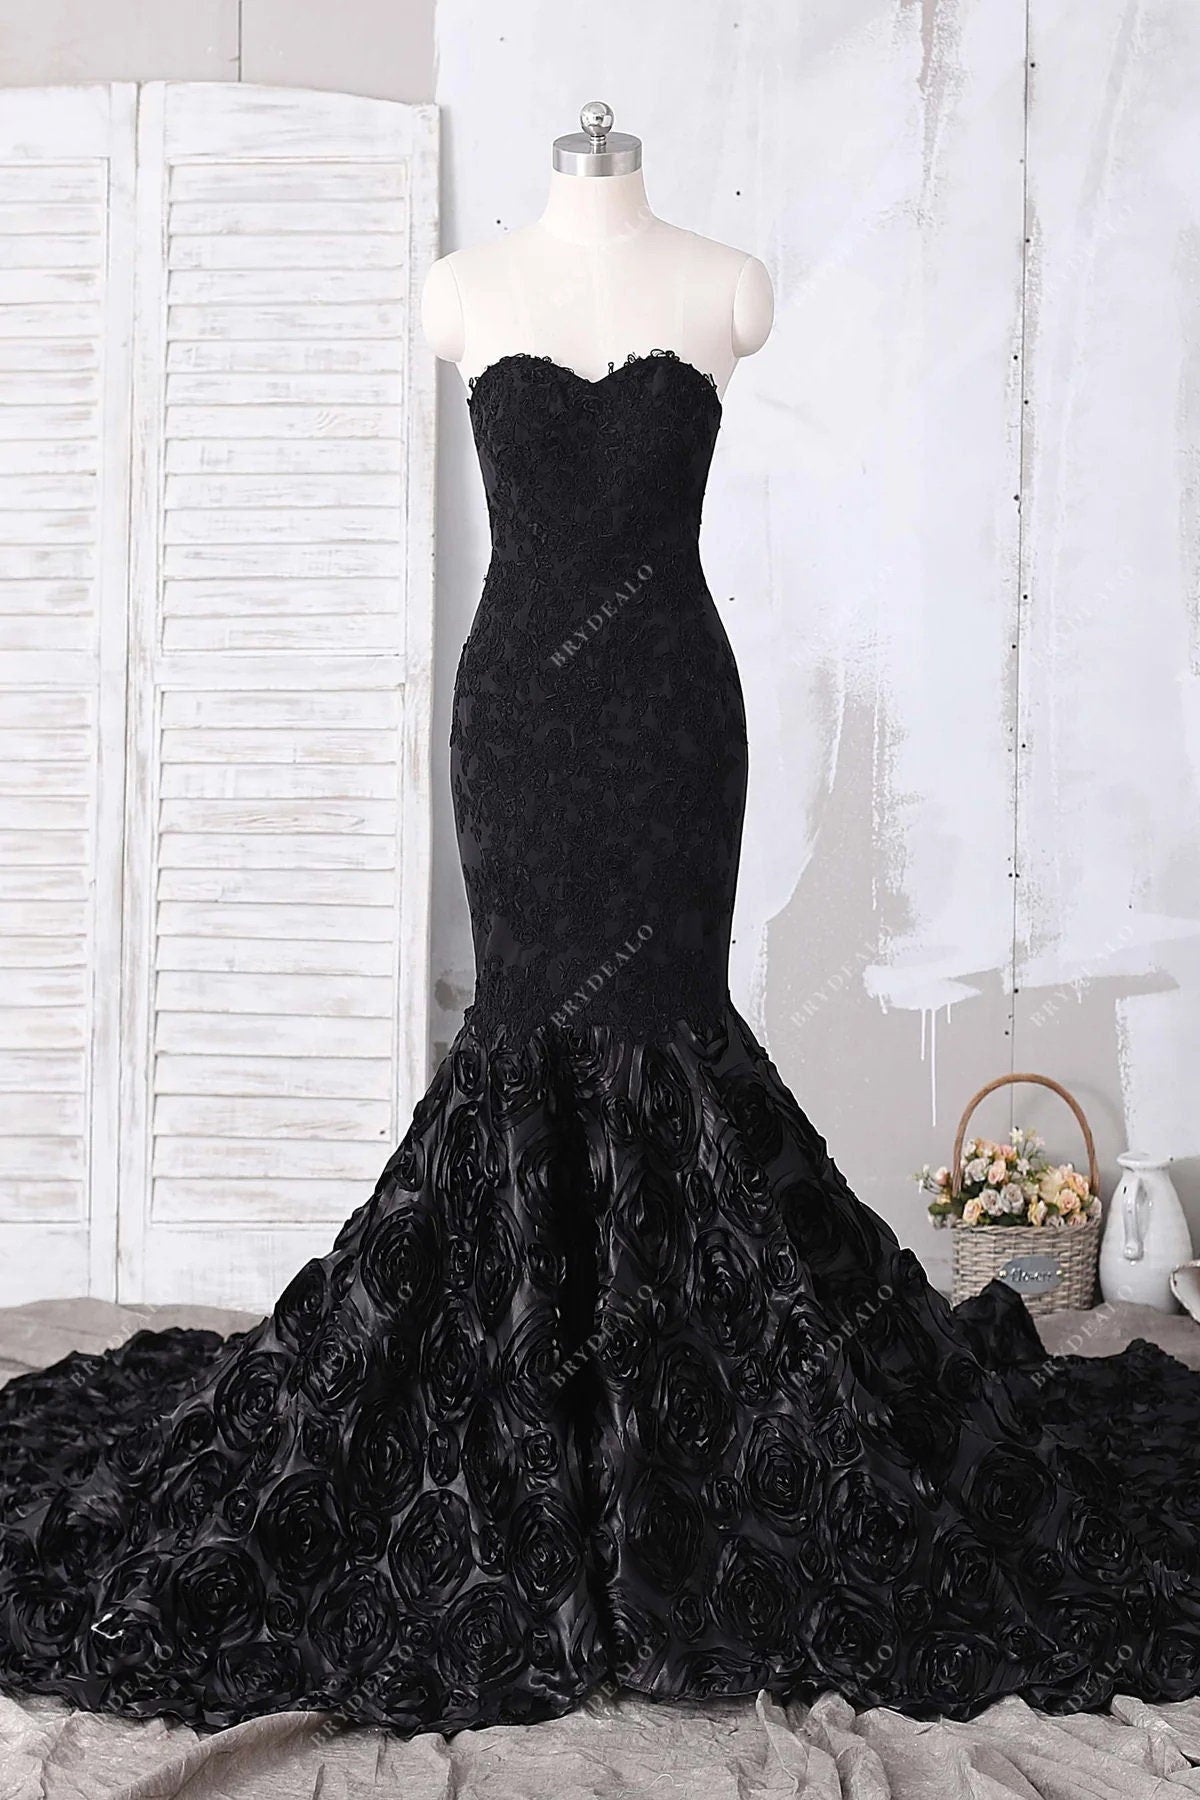 Sparkling Black Gothic Quinceanera Dresses With Appliques And Off Shoulder  Design Perfect For Prom, Sweet 15, And Gothic Occasions From Readygogo,  $209.05 | DHgate.Com